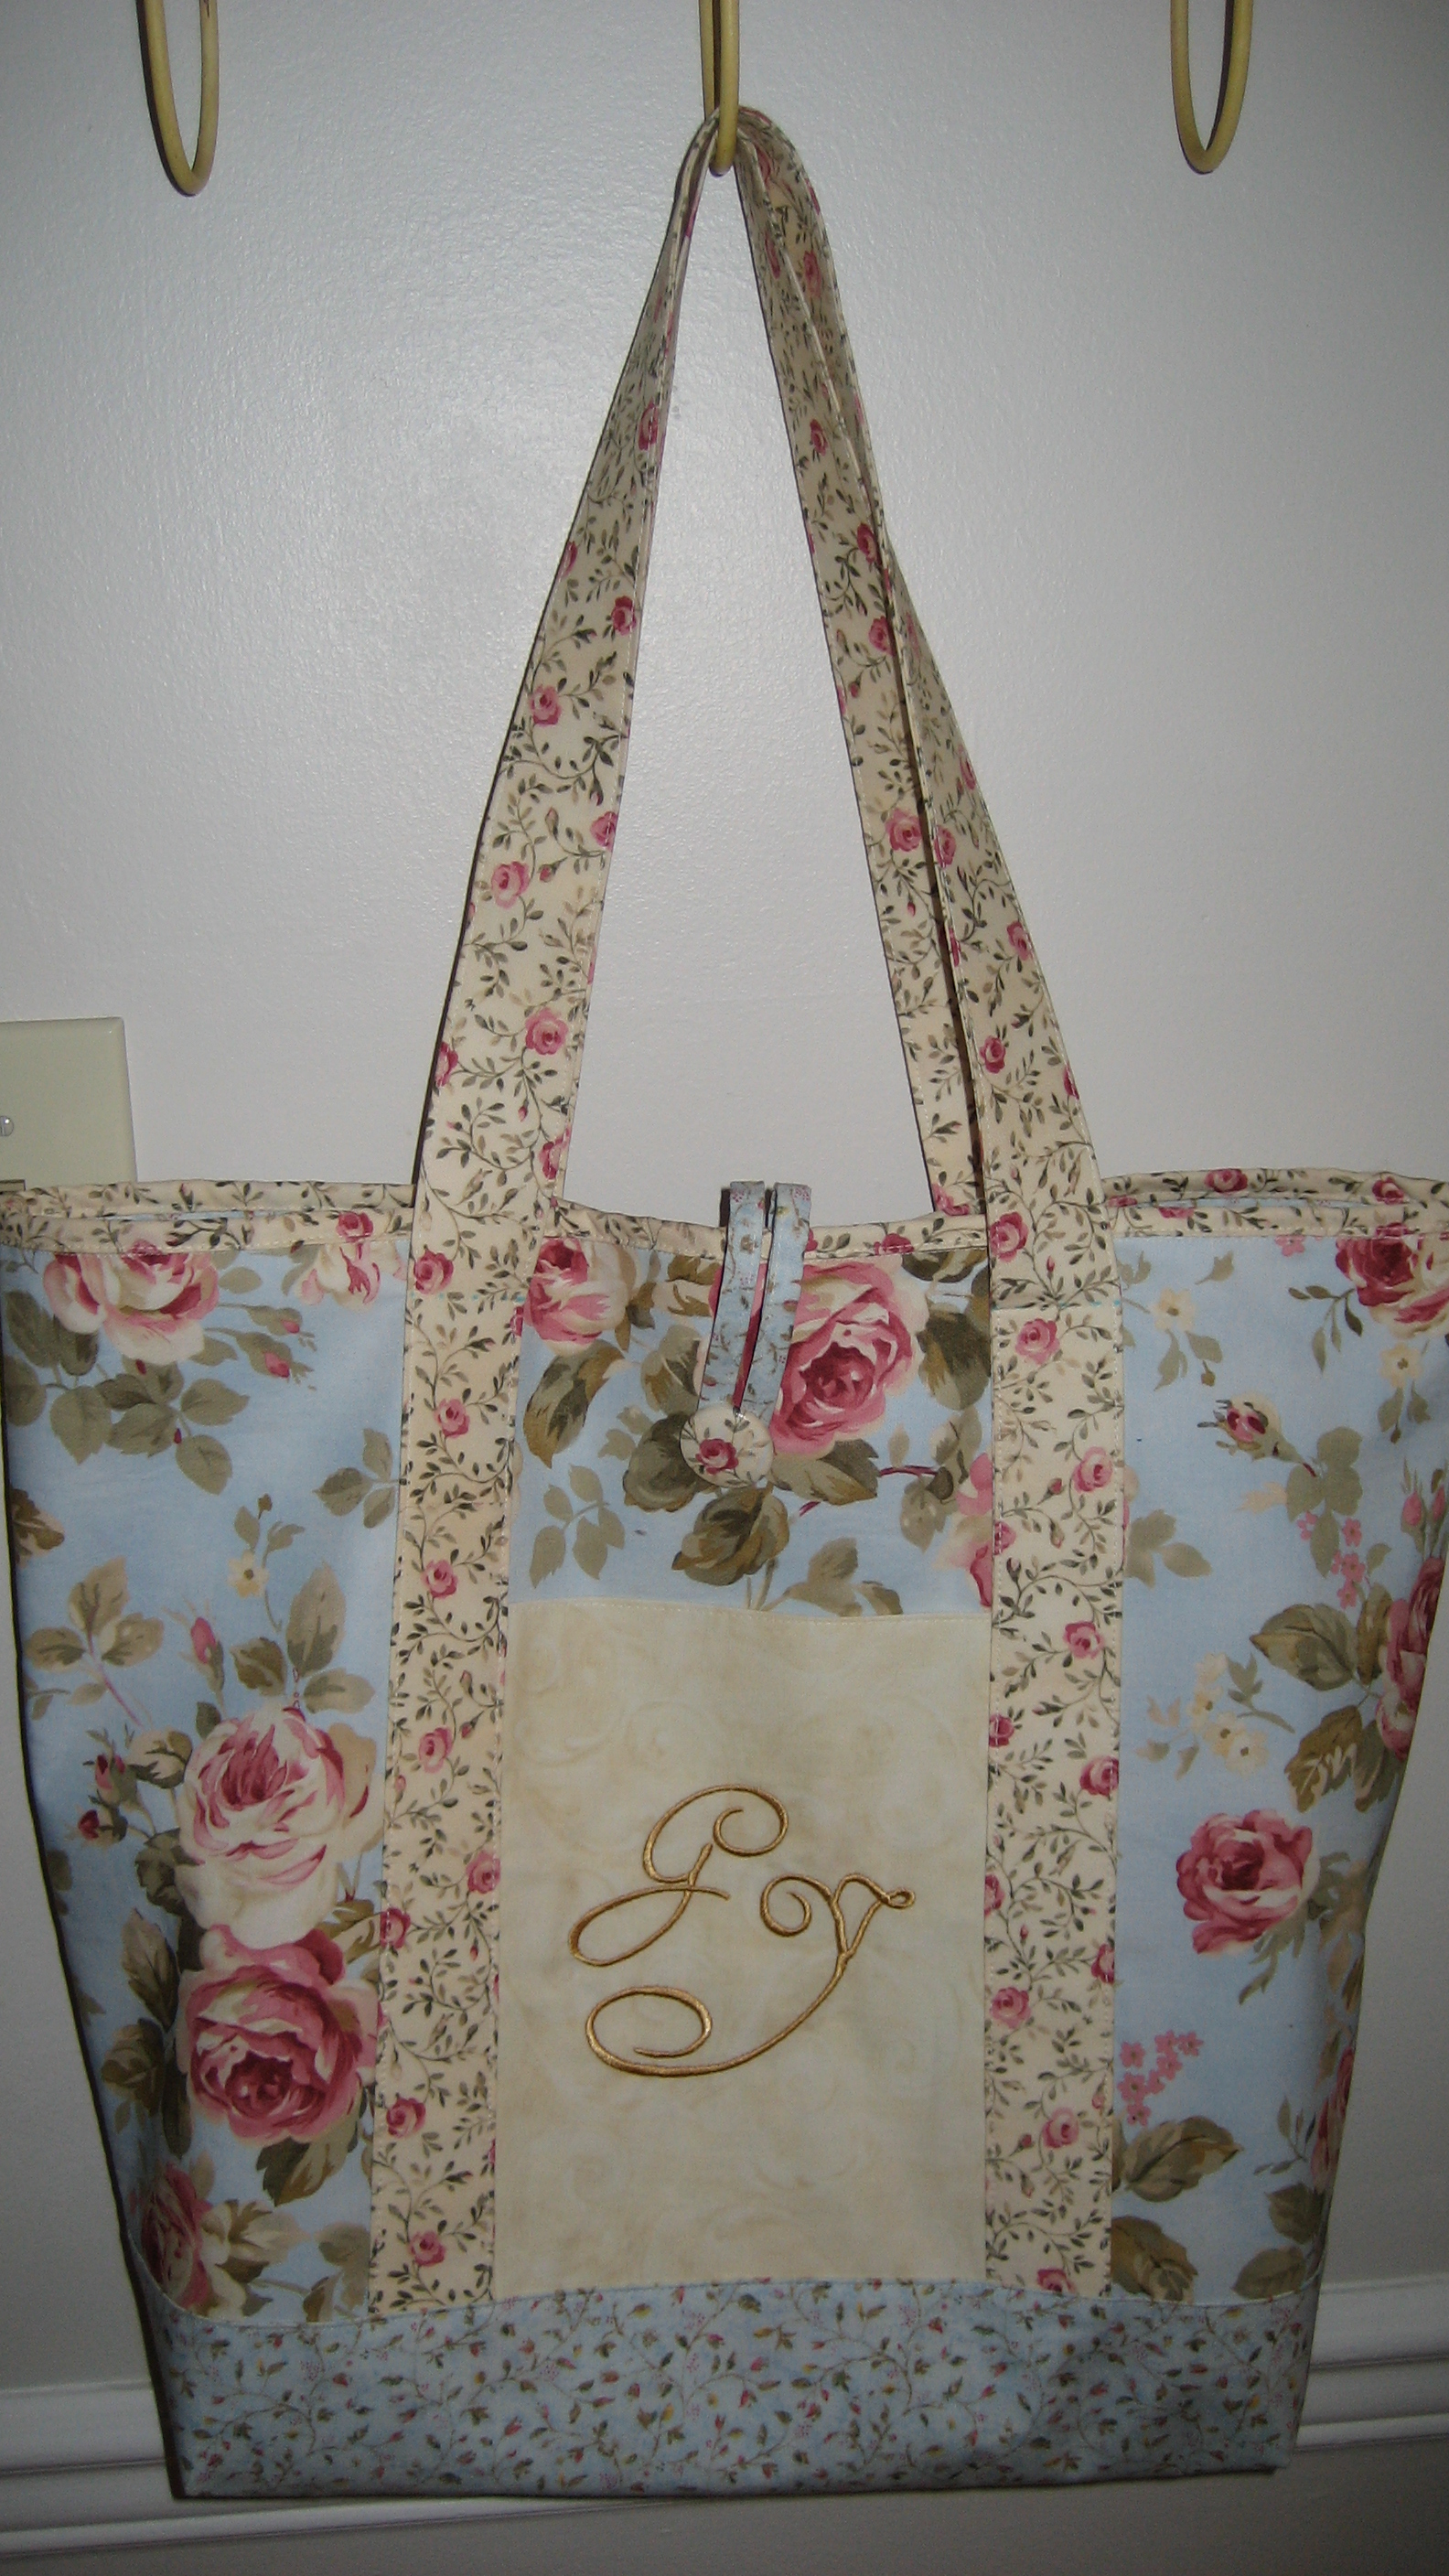 Shabby Chic Monogrammed Tote – Sewing Projects | www.ermes-unice.fr